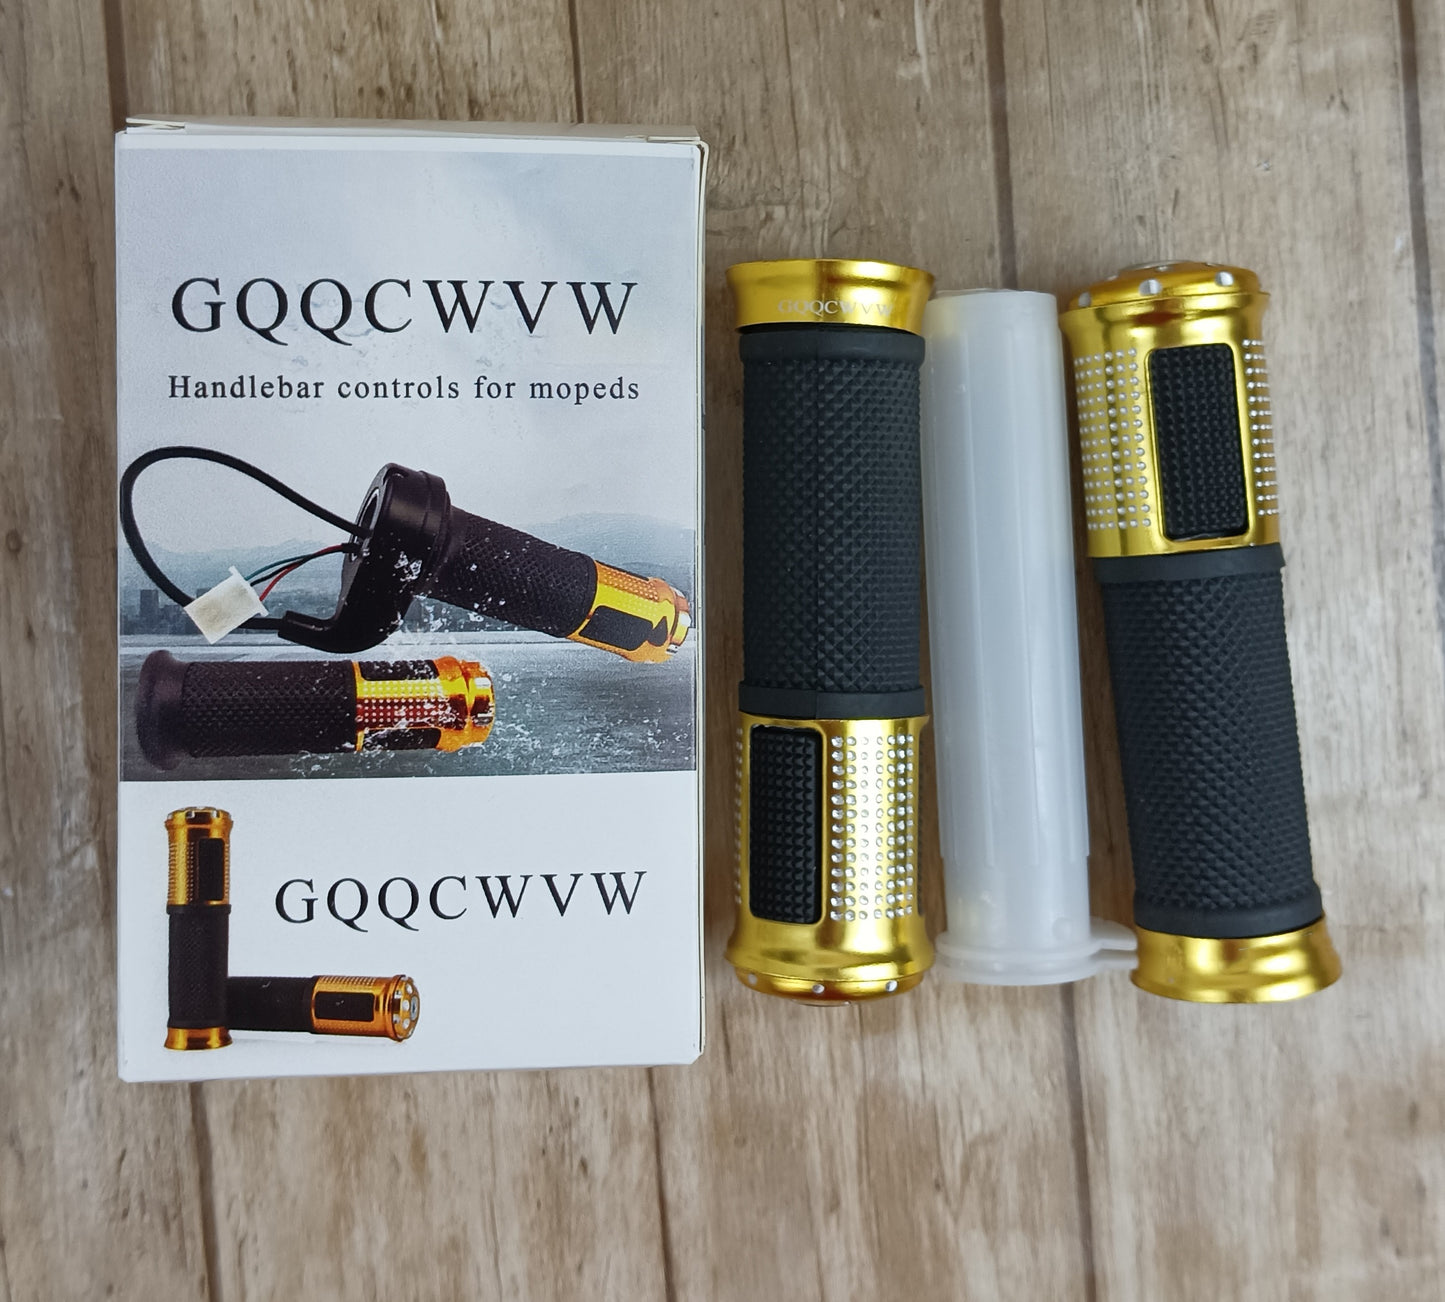 GQQCWVW Handlebar controls for mopeds Universal motorcycle power-assisted bike handlebar covers handlebar covers battery car modification accessories handlebar covers shock-absorbing non-slip rubber handlebar covers